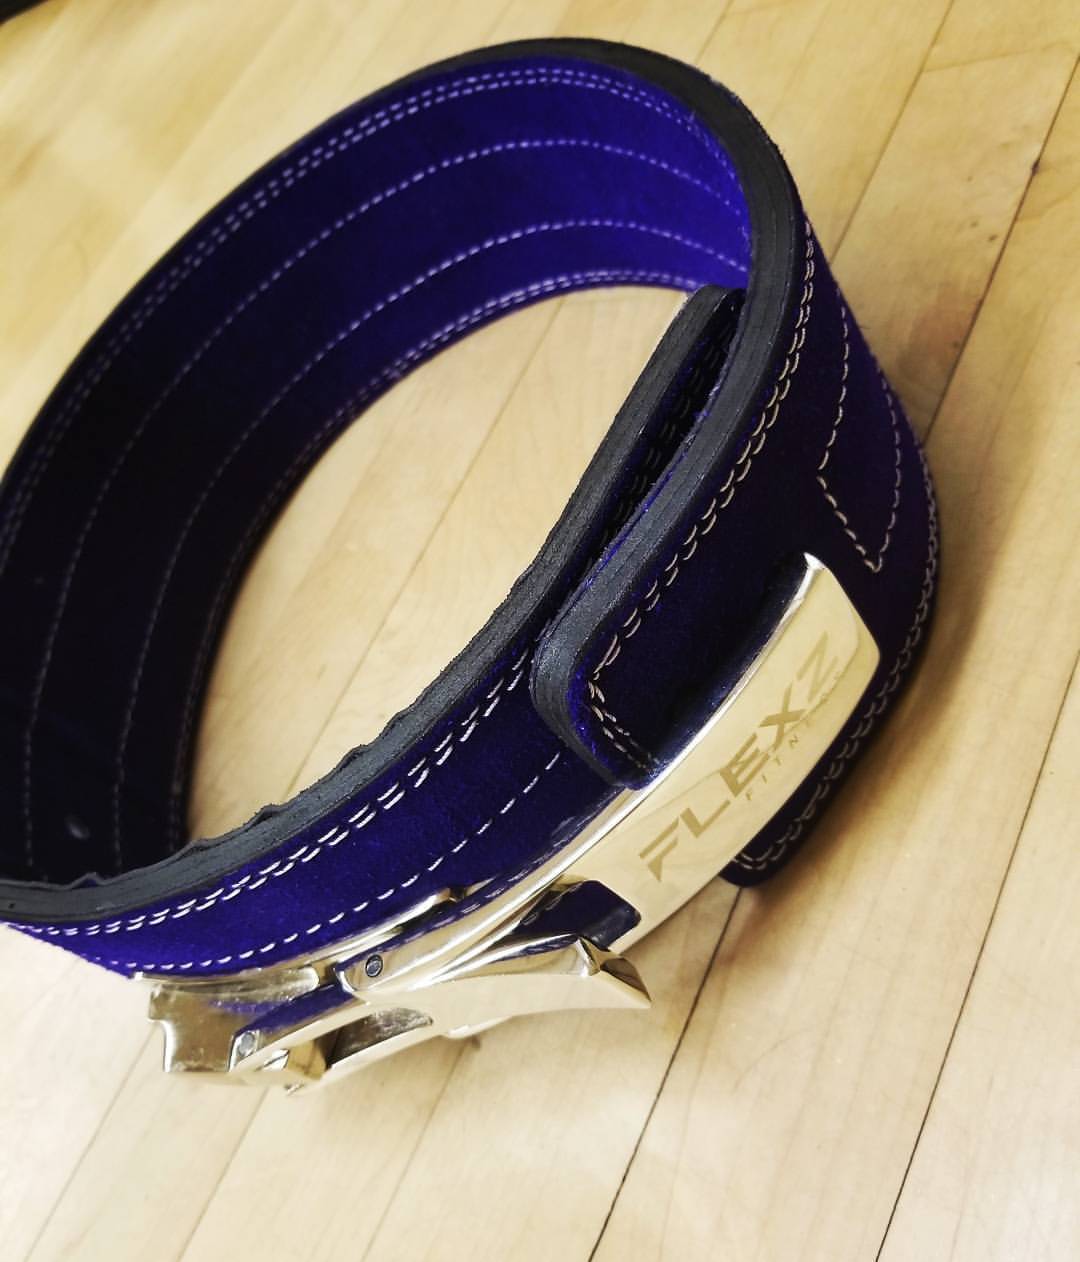 Flexz Fitness Lever Weight Lifting Leather Belt Instagram